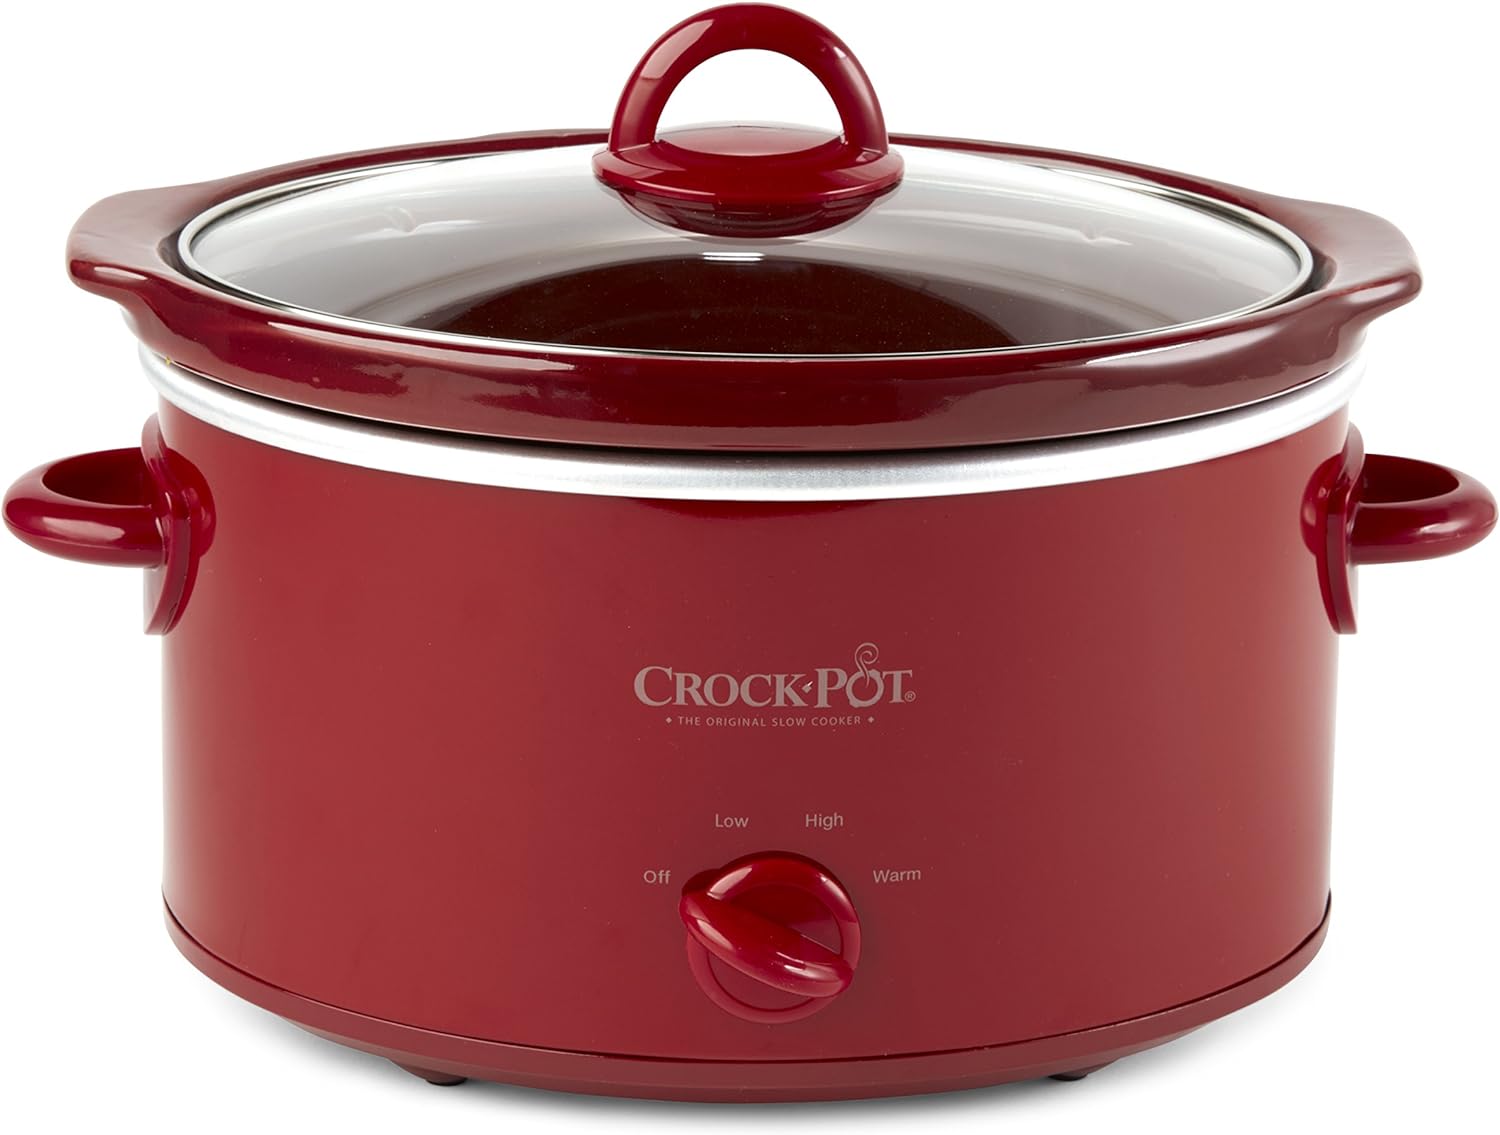 Crock-Pot Small 4 Quart Manual Slow Cooker and Food Warmer, Red (SCV401-TR)